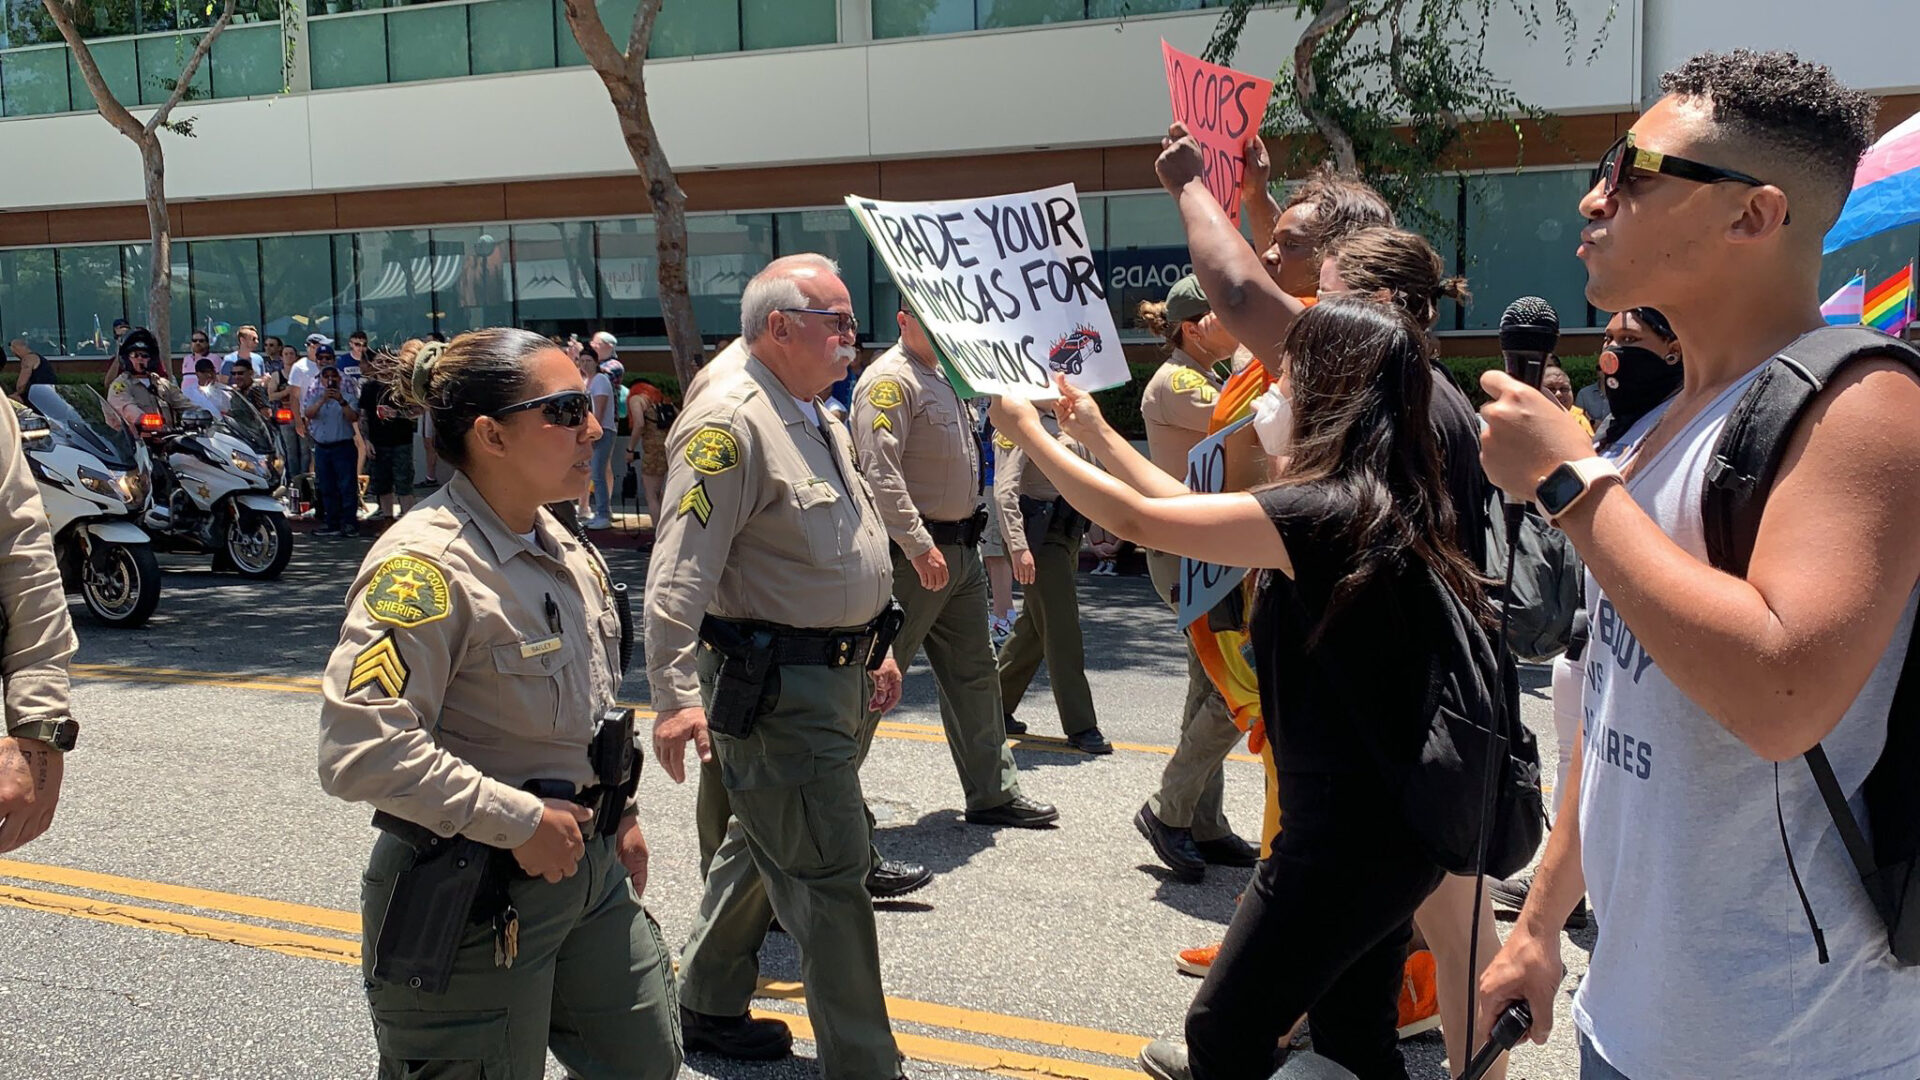 Protesters are being back down by a group of Los Angeles Sheriff's Deputies at LA Pride. One protester is holding a microphone and two are holding signs. One sign says "No cops at Pride" and the other says "Trade your mimosas for molotovs."